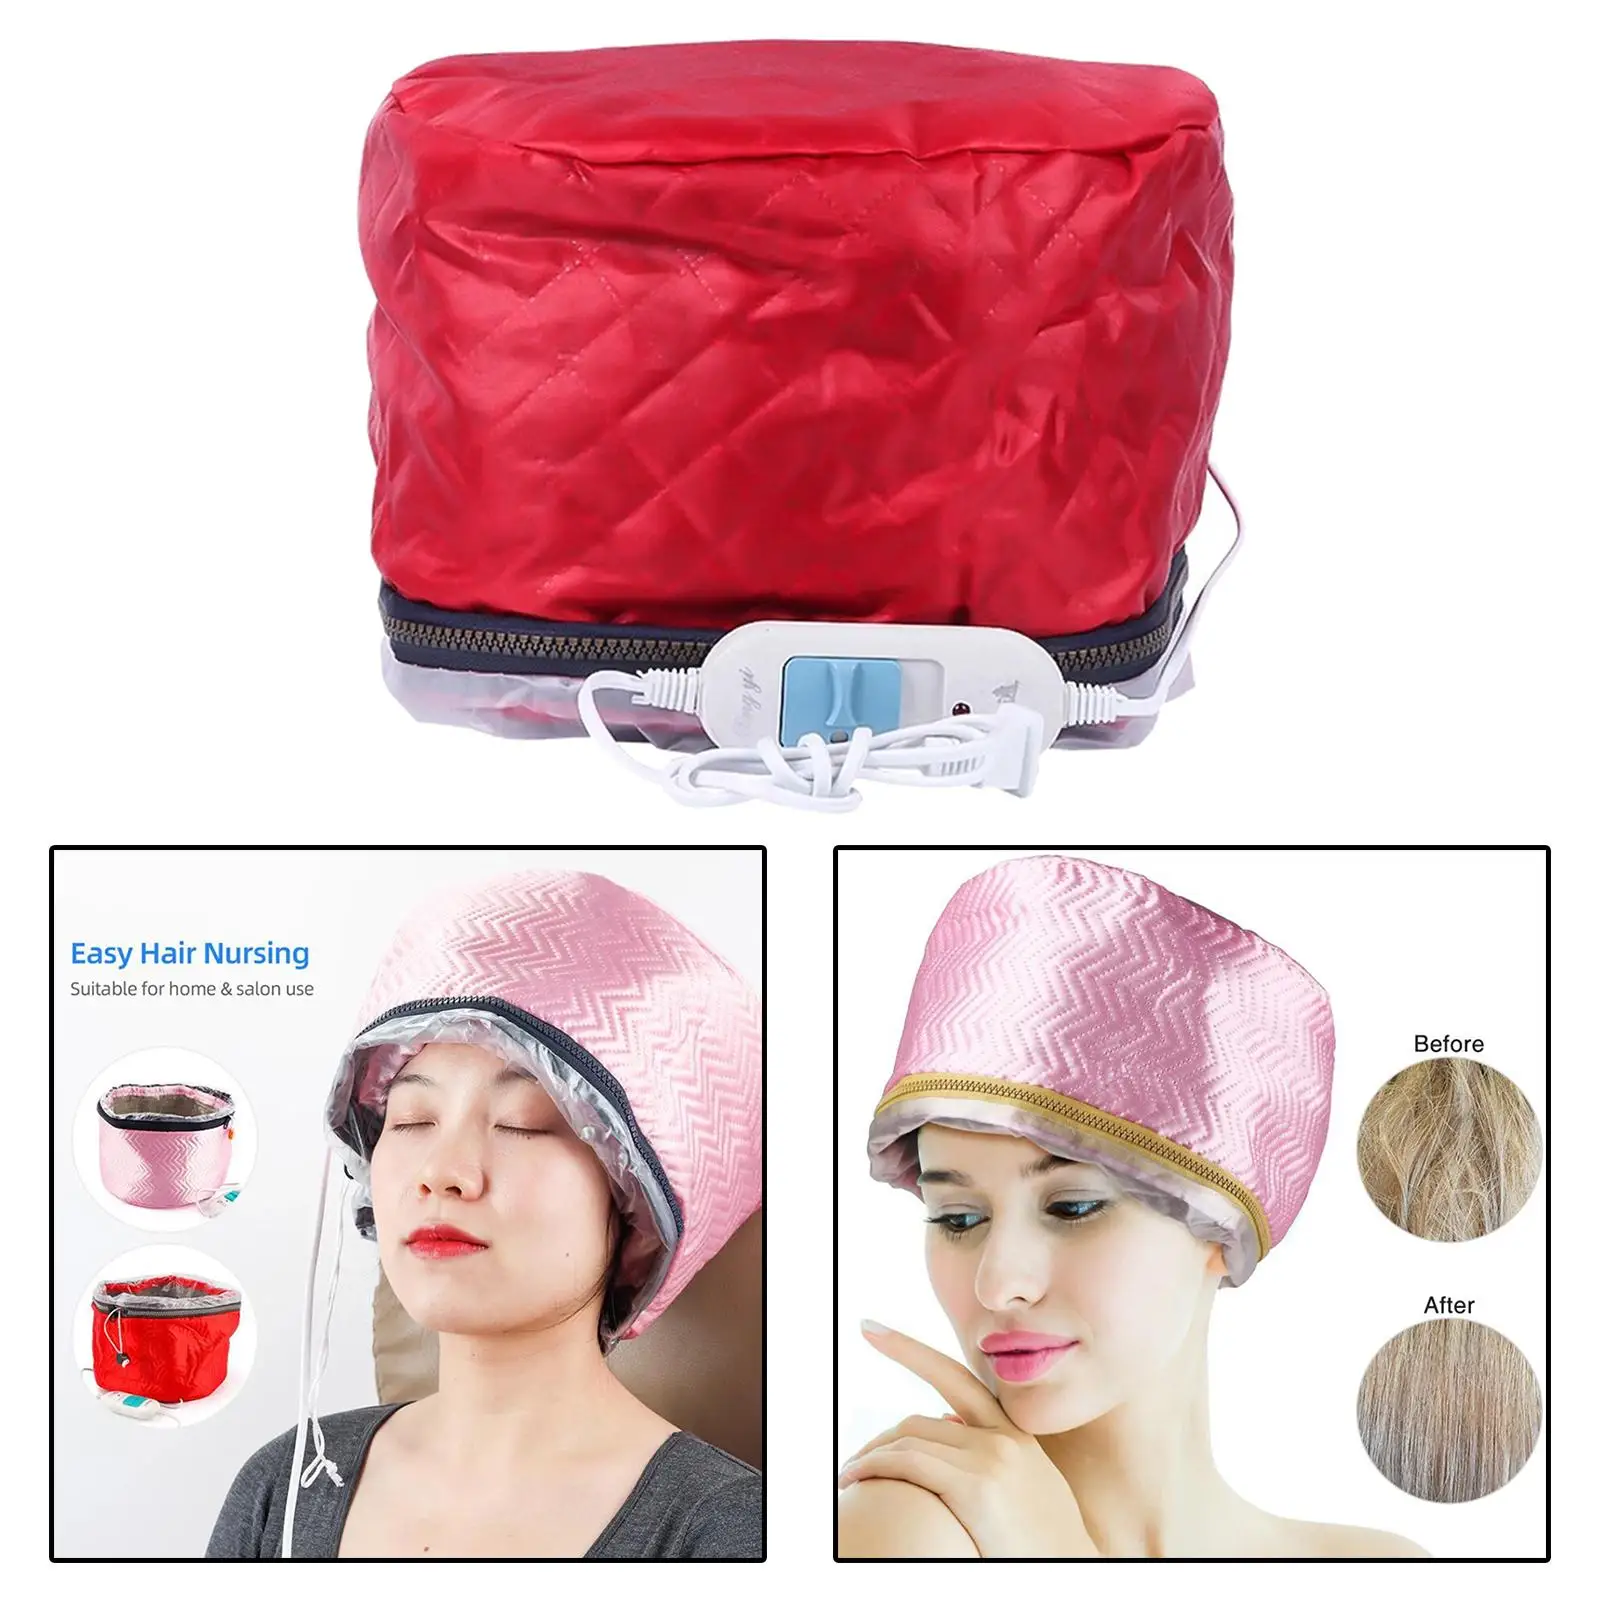 Hair Heating Caps Steamer 3-Modes Adjustable Safe Dryers Microwave Hot Caps for Deep Conditioning Home Salon Styling Nursing SPA